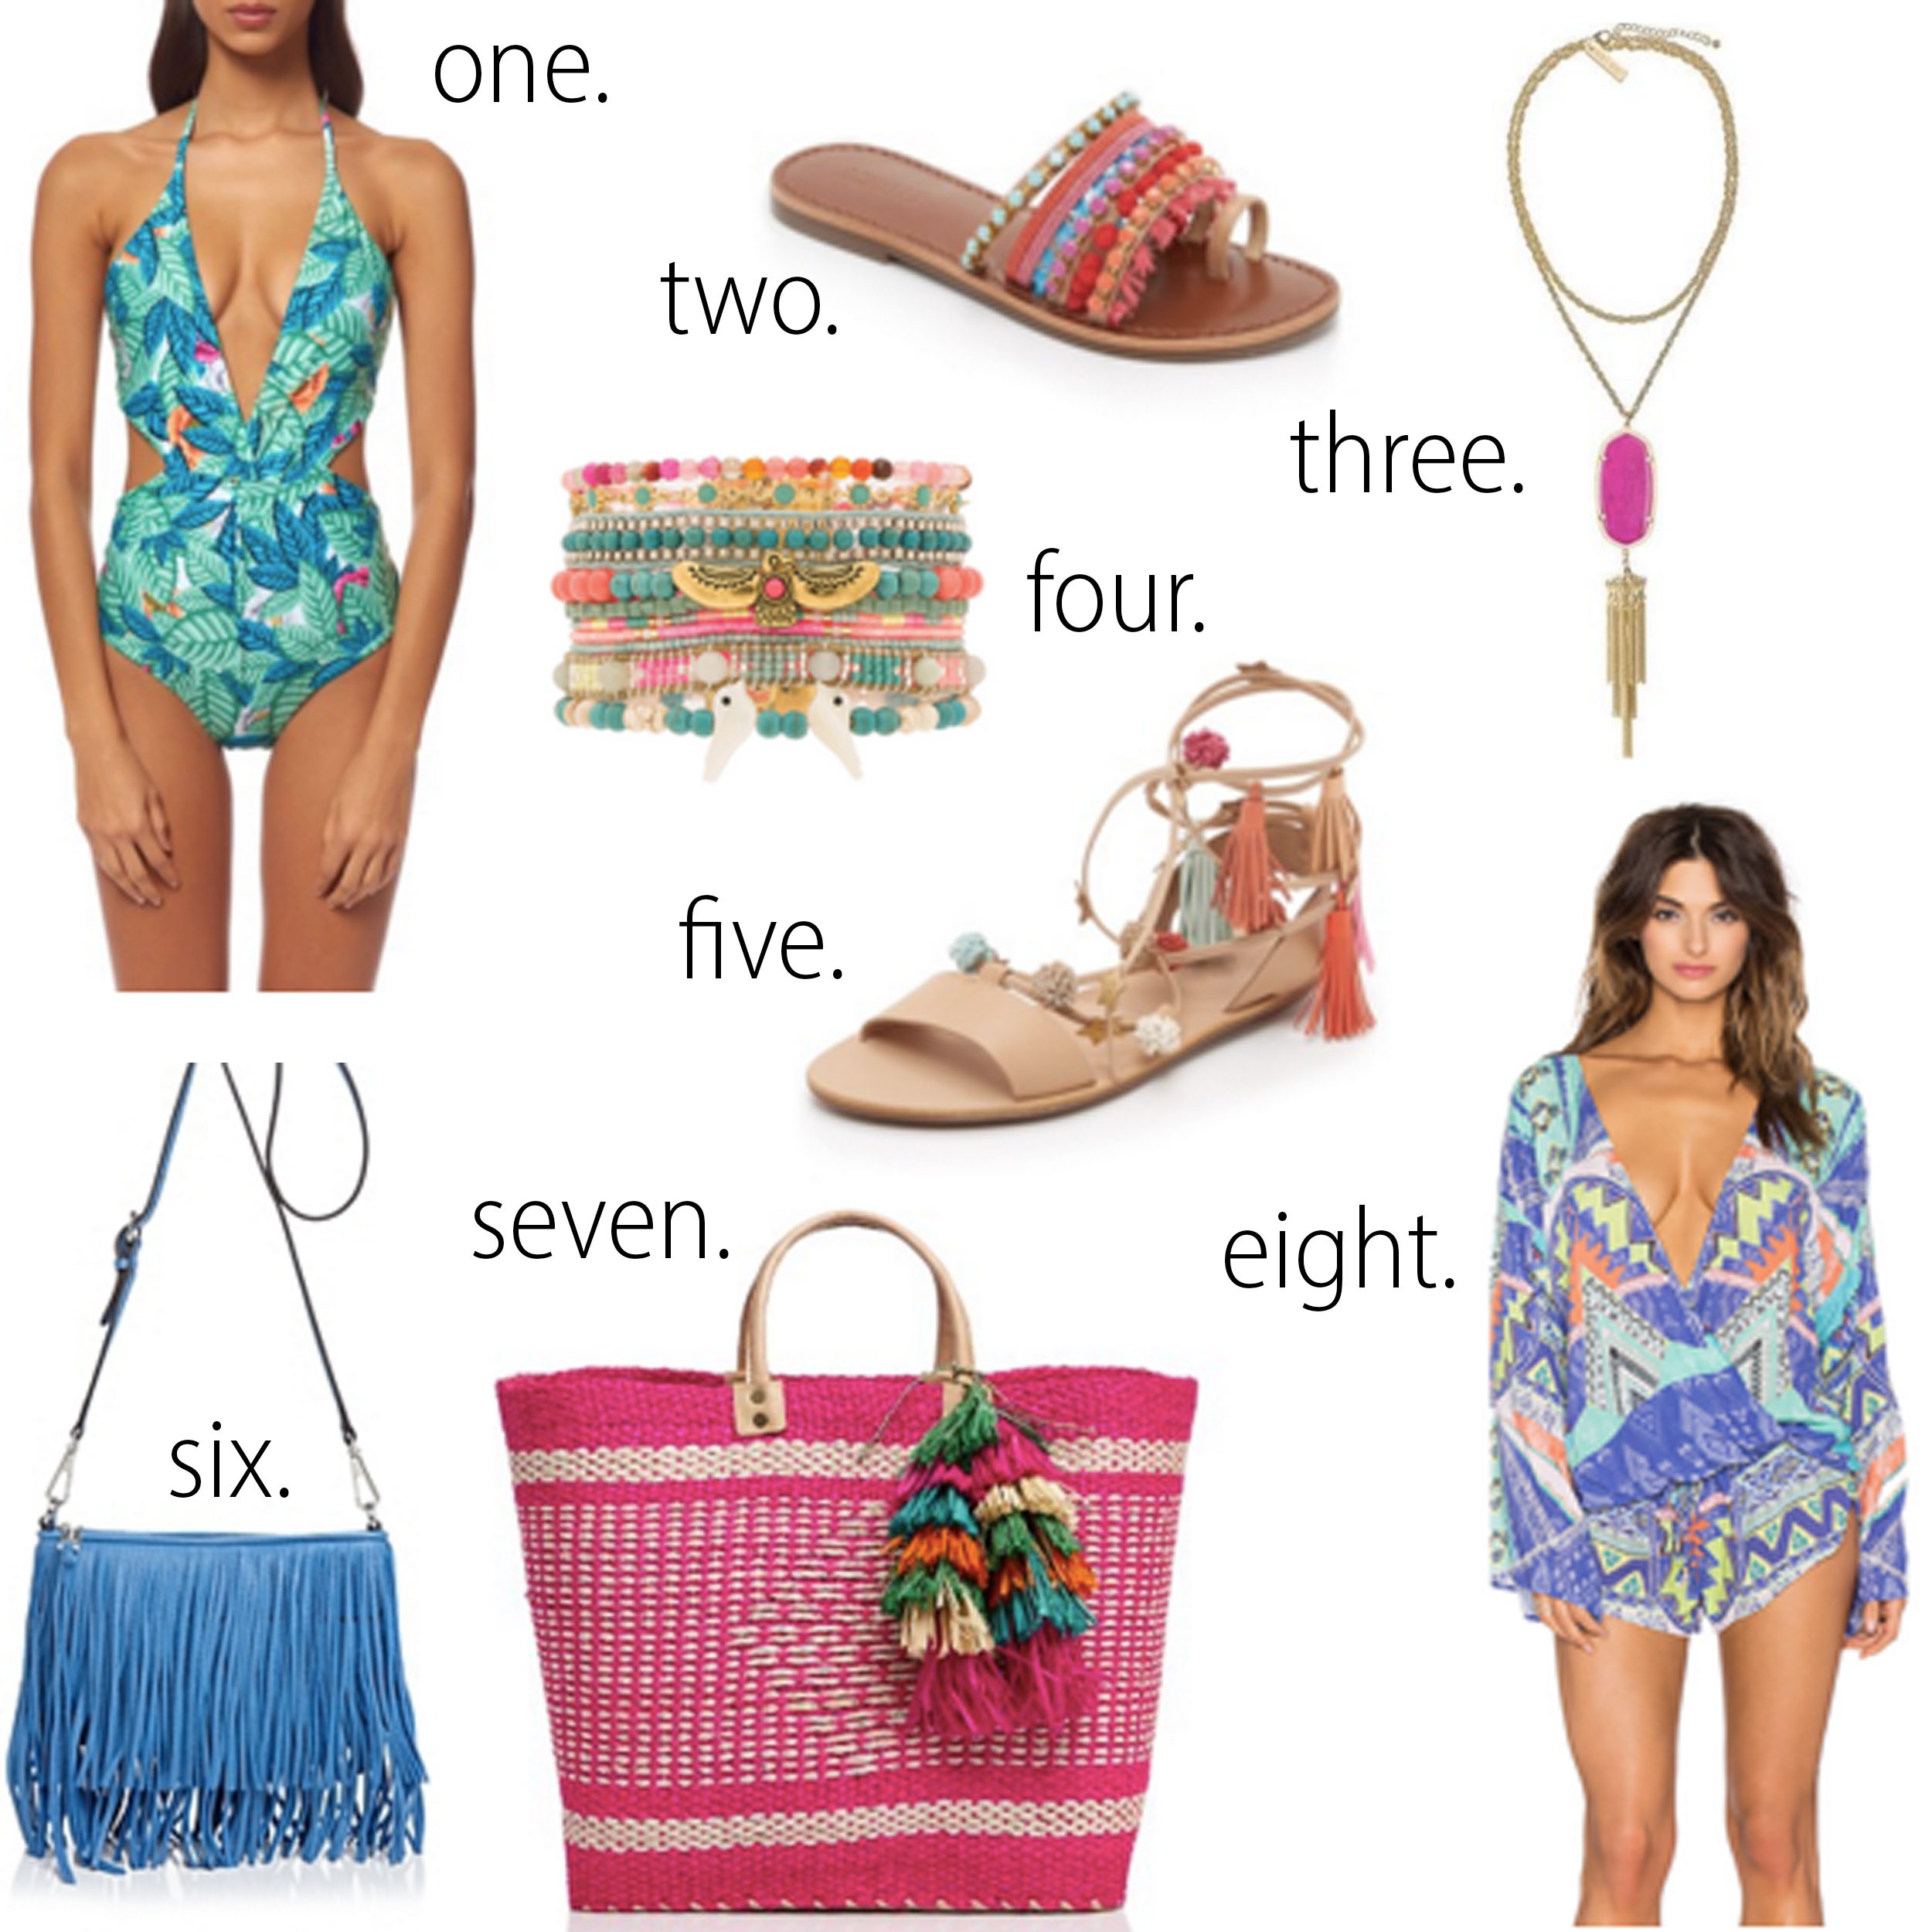 missyonmadison, melissa tierney, tory burch wedges, revolve clothing romper, mara hoffman swimsuit, all for color, all for color bikini, palm print bikini, pineapple bikini, floppy hat, vita liberata, tanning lotion, rebecca minkoff fringe crossbody, neon beach tote, palm springs, palm springs packing guide, what to pack for a weekend getaway, girls trip, summer travel packing, ray bans, loeffler randal sandals, schutz sandals, schutz shoes, lace up sandals, kendra scott necklace, kendra scott rayne necklace,